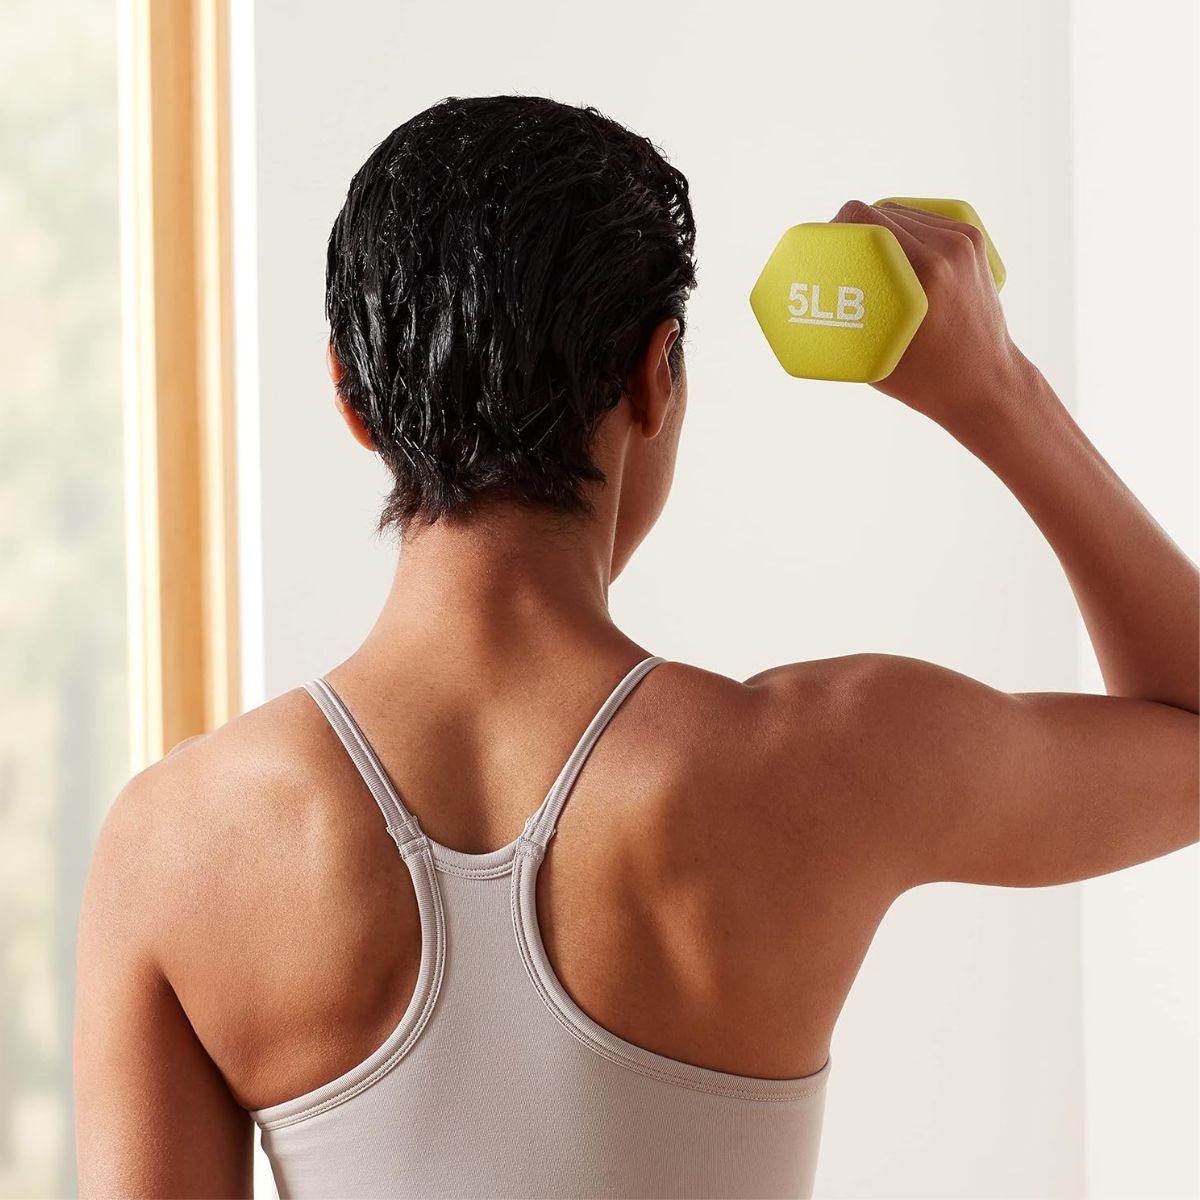 12 of the Best Home Fitness Products You Can Get for Under $50 on